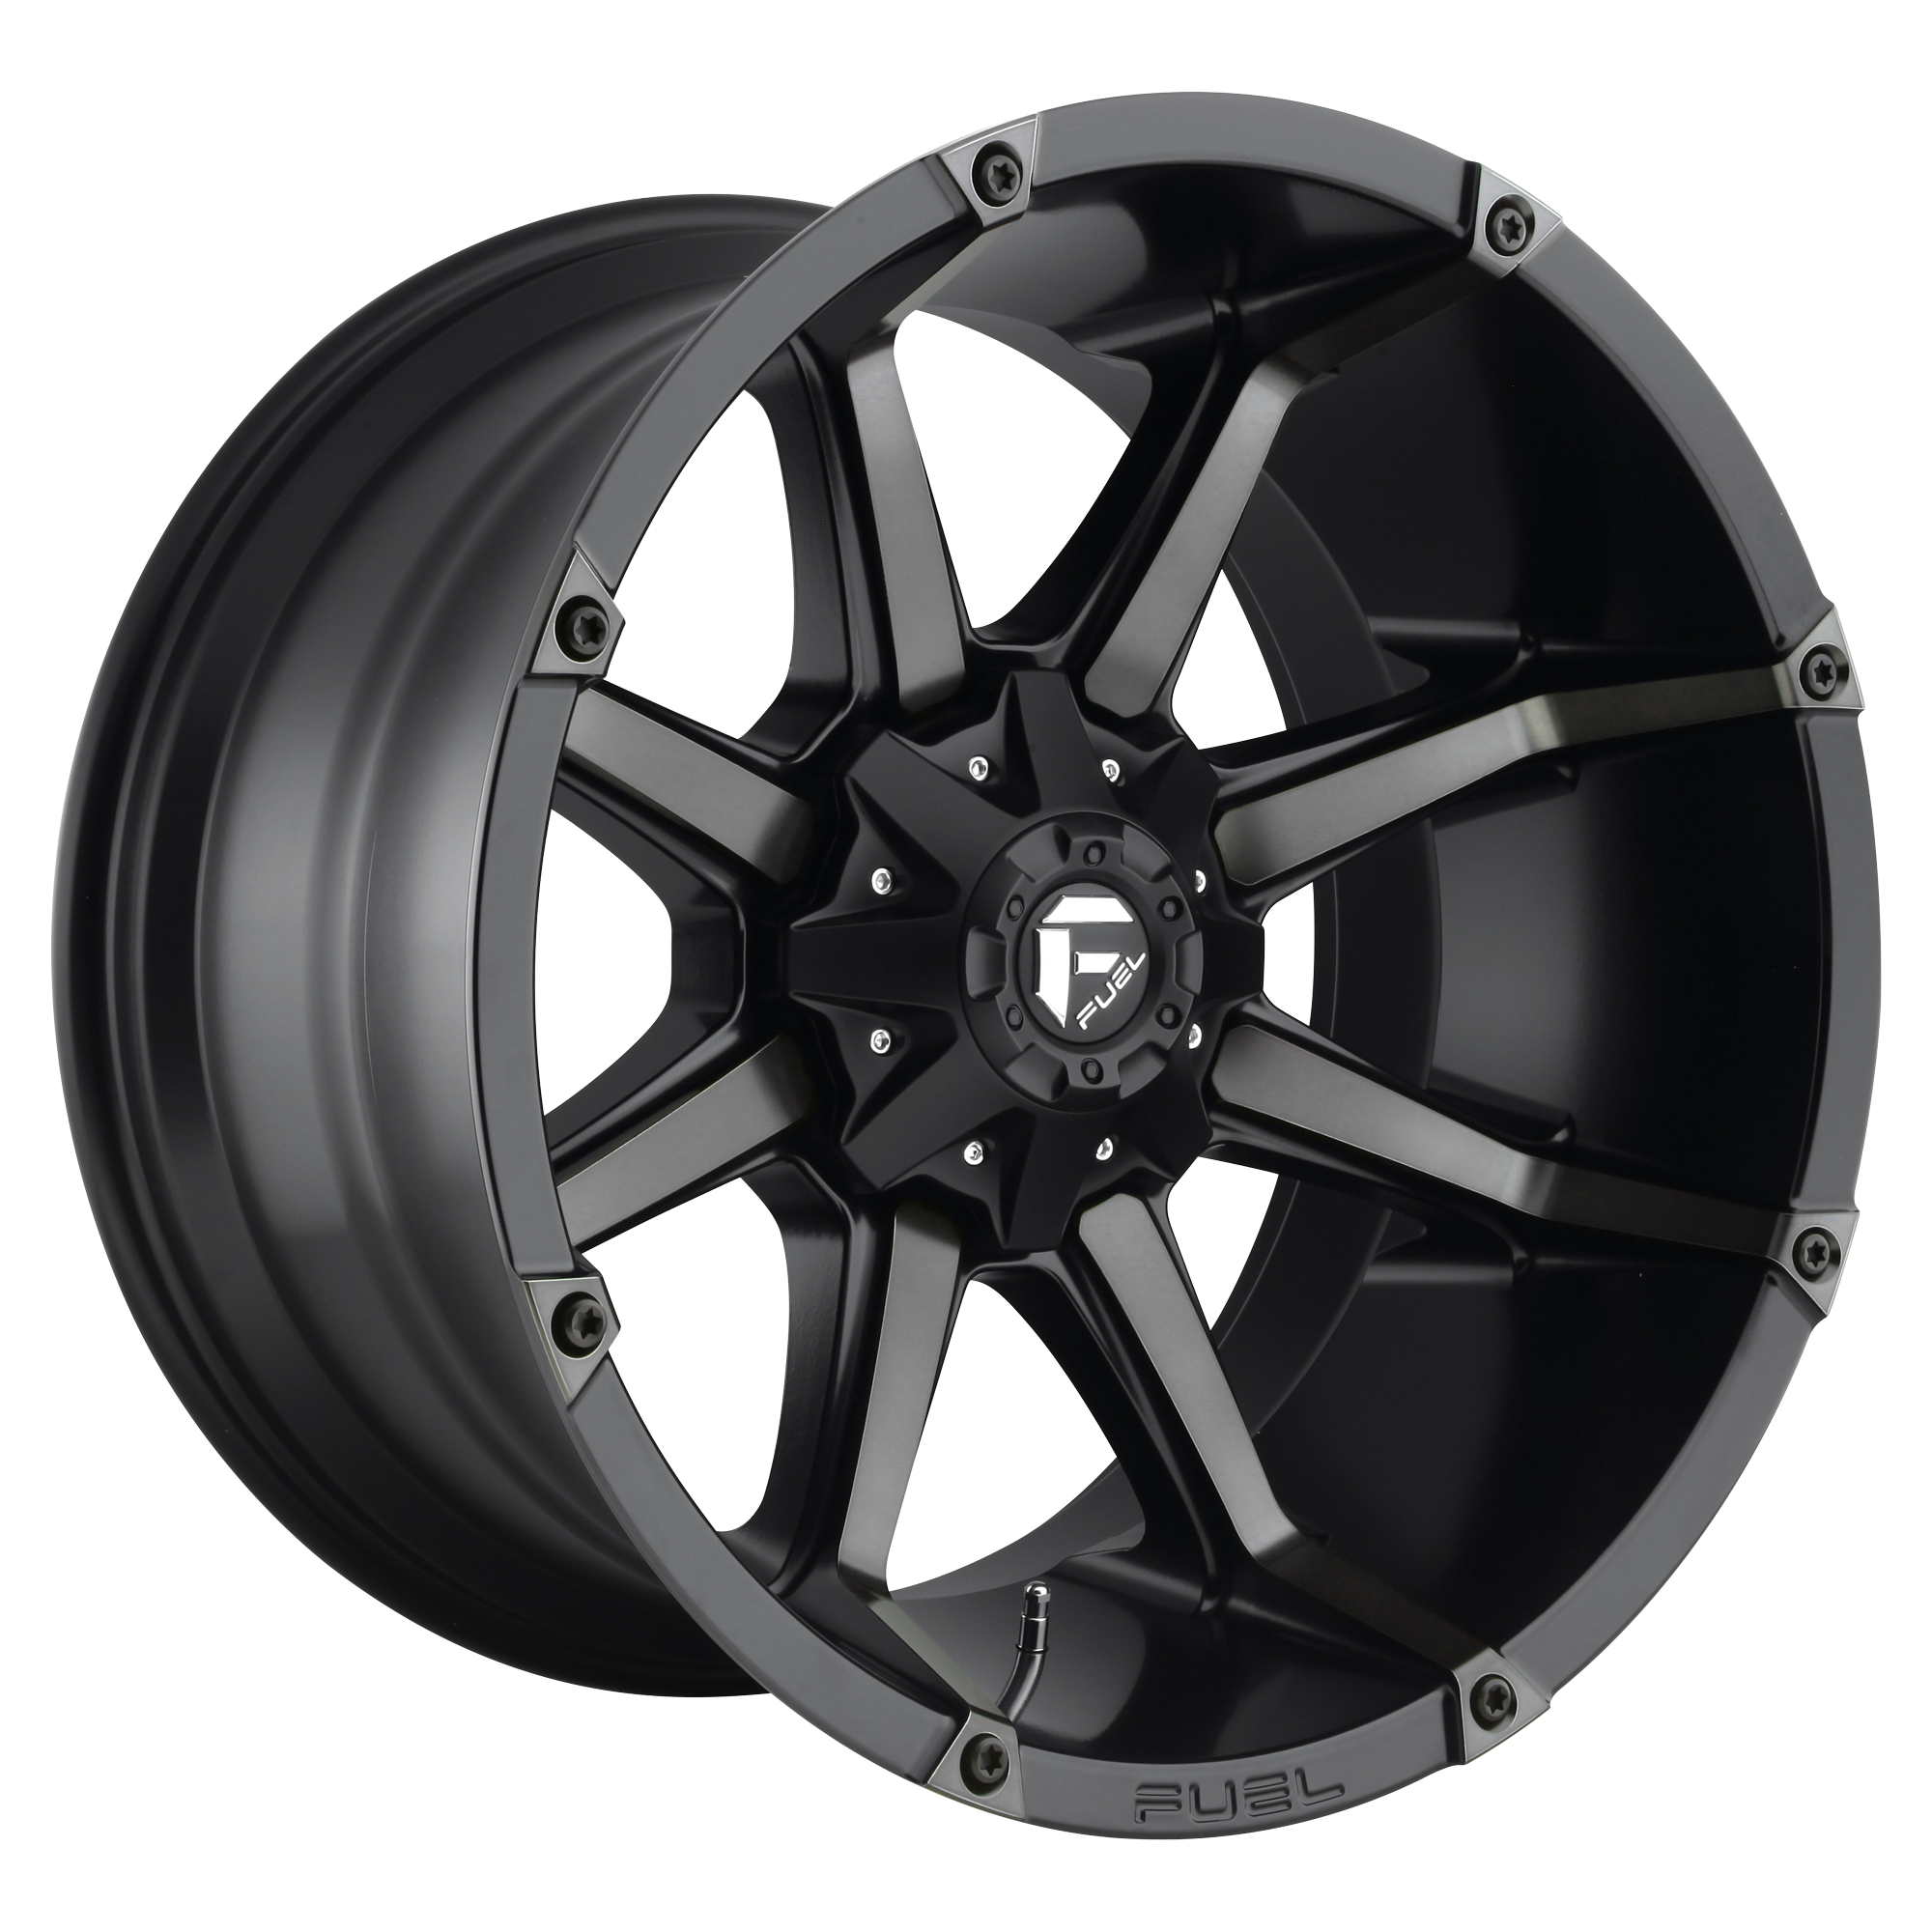 COUPLER 20x9 5x139.70/5x150.00 MATTE BLACK DOUBLE DARK TINT (20 mm) - Tires and Engine Performance